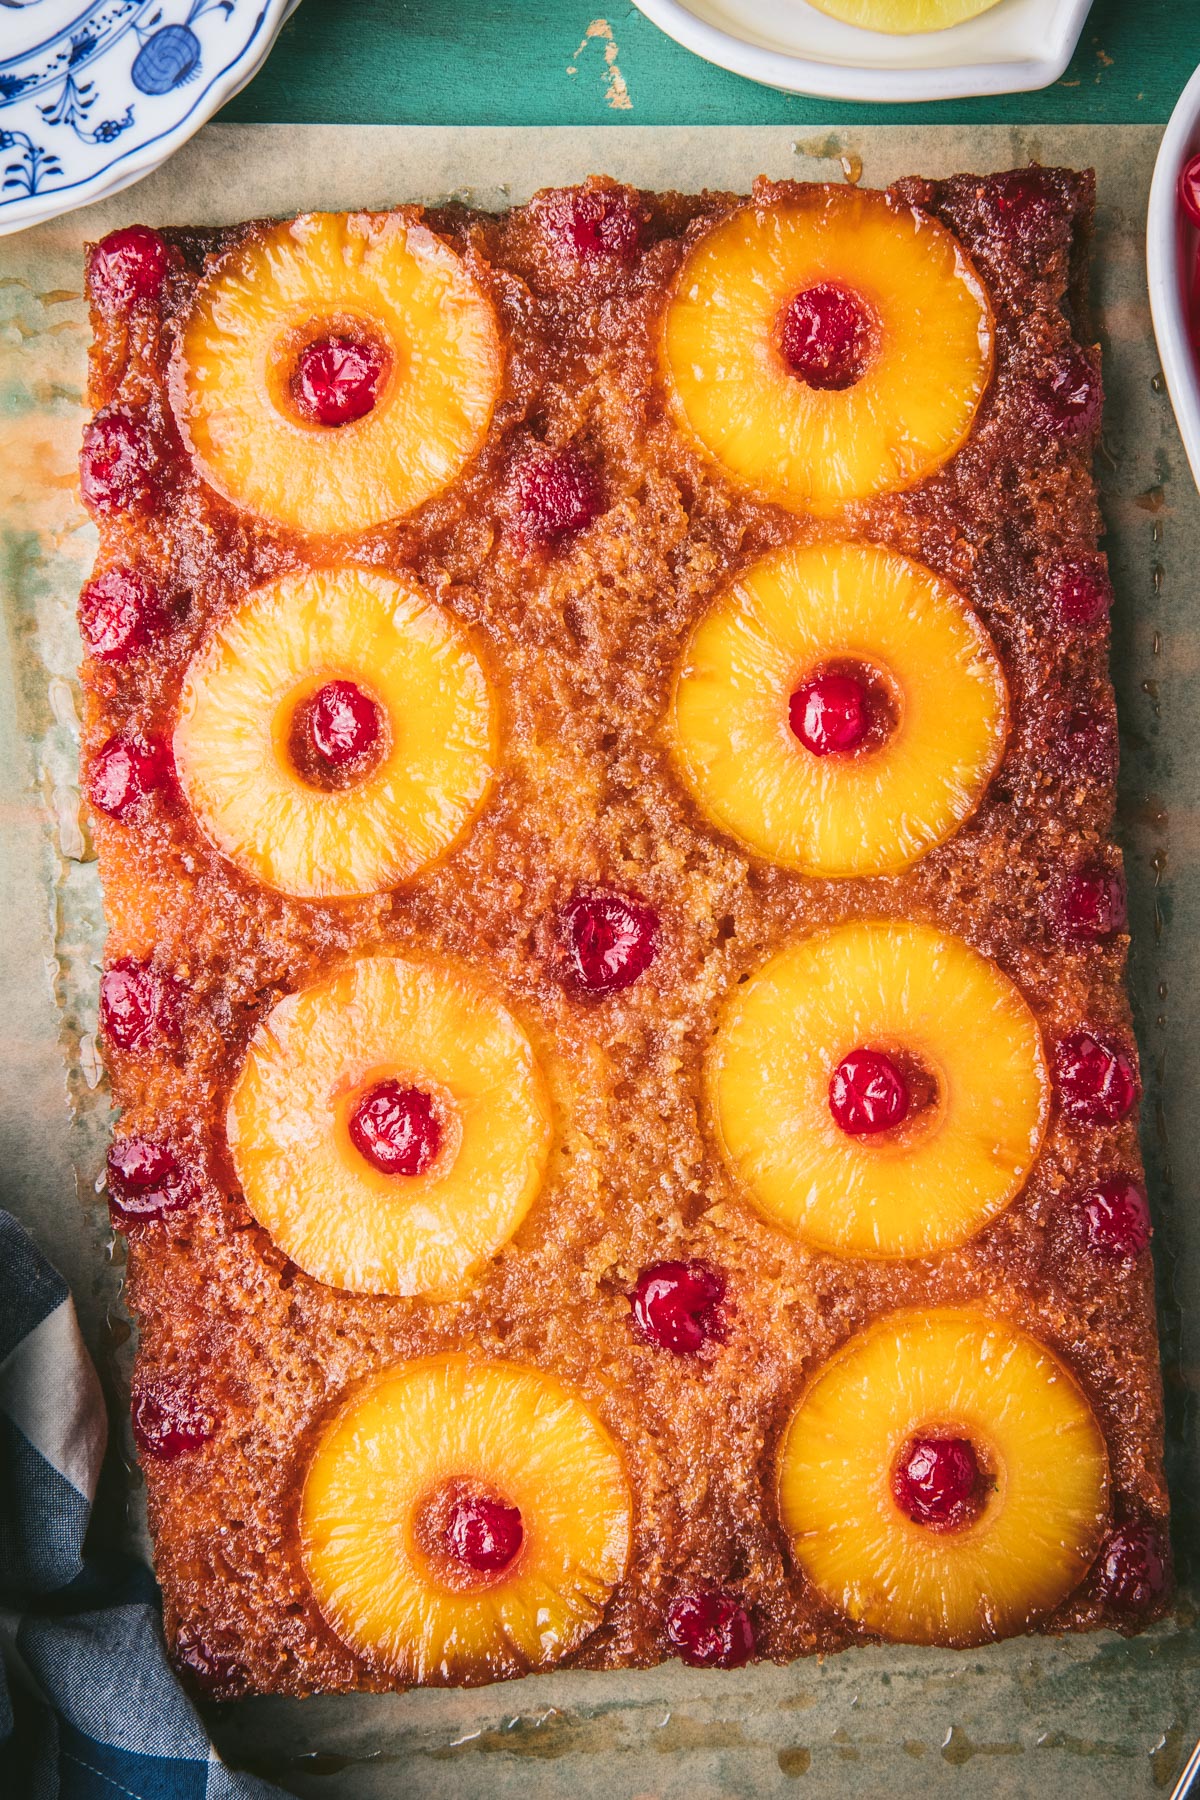 Pineapple upside down cake on a table before slicing